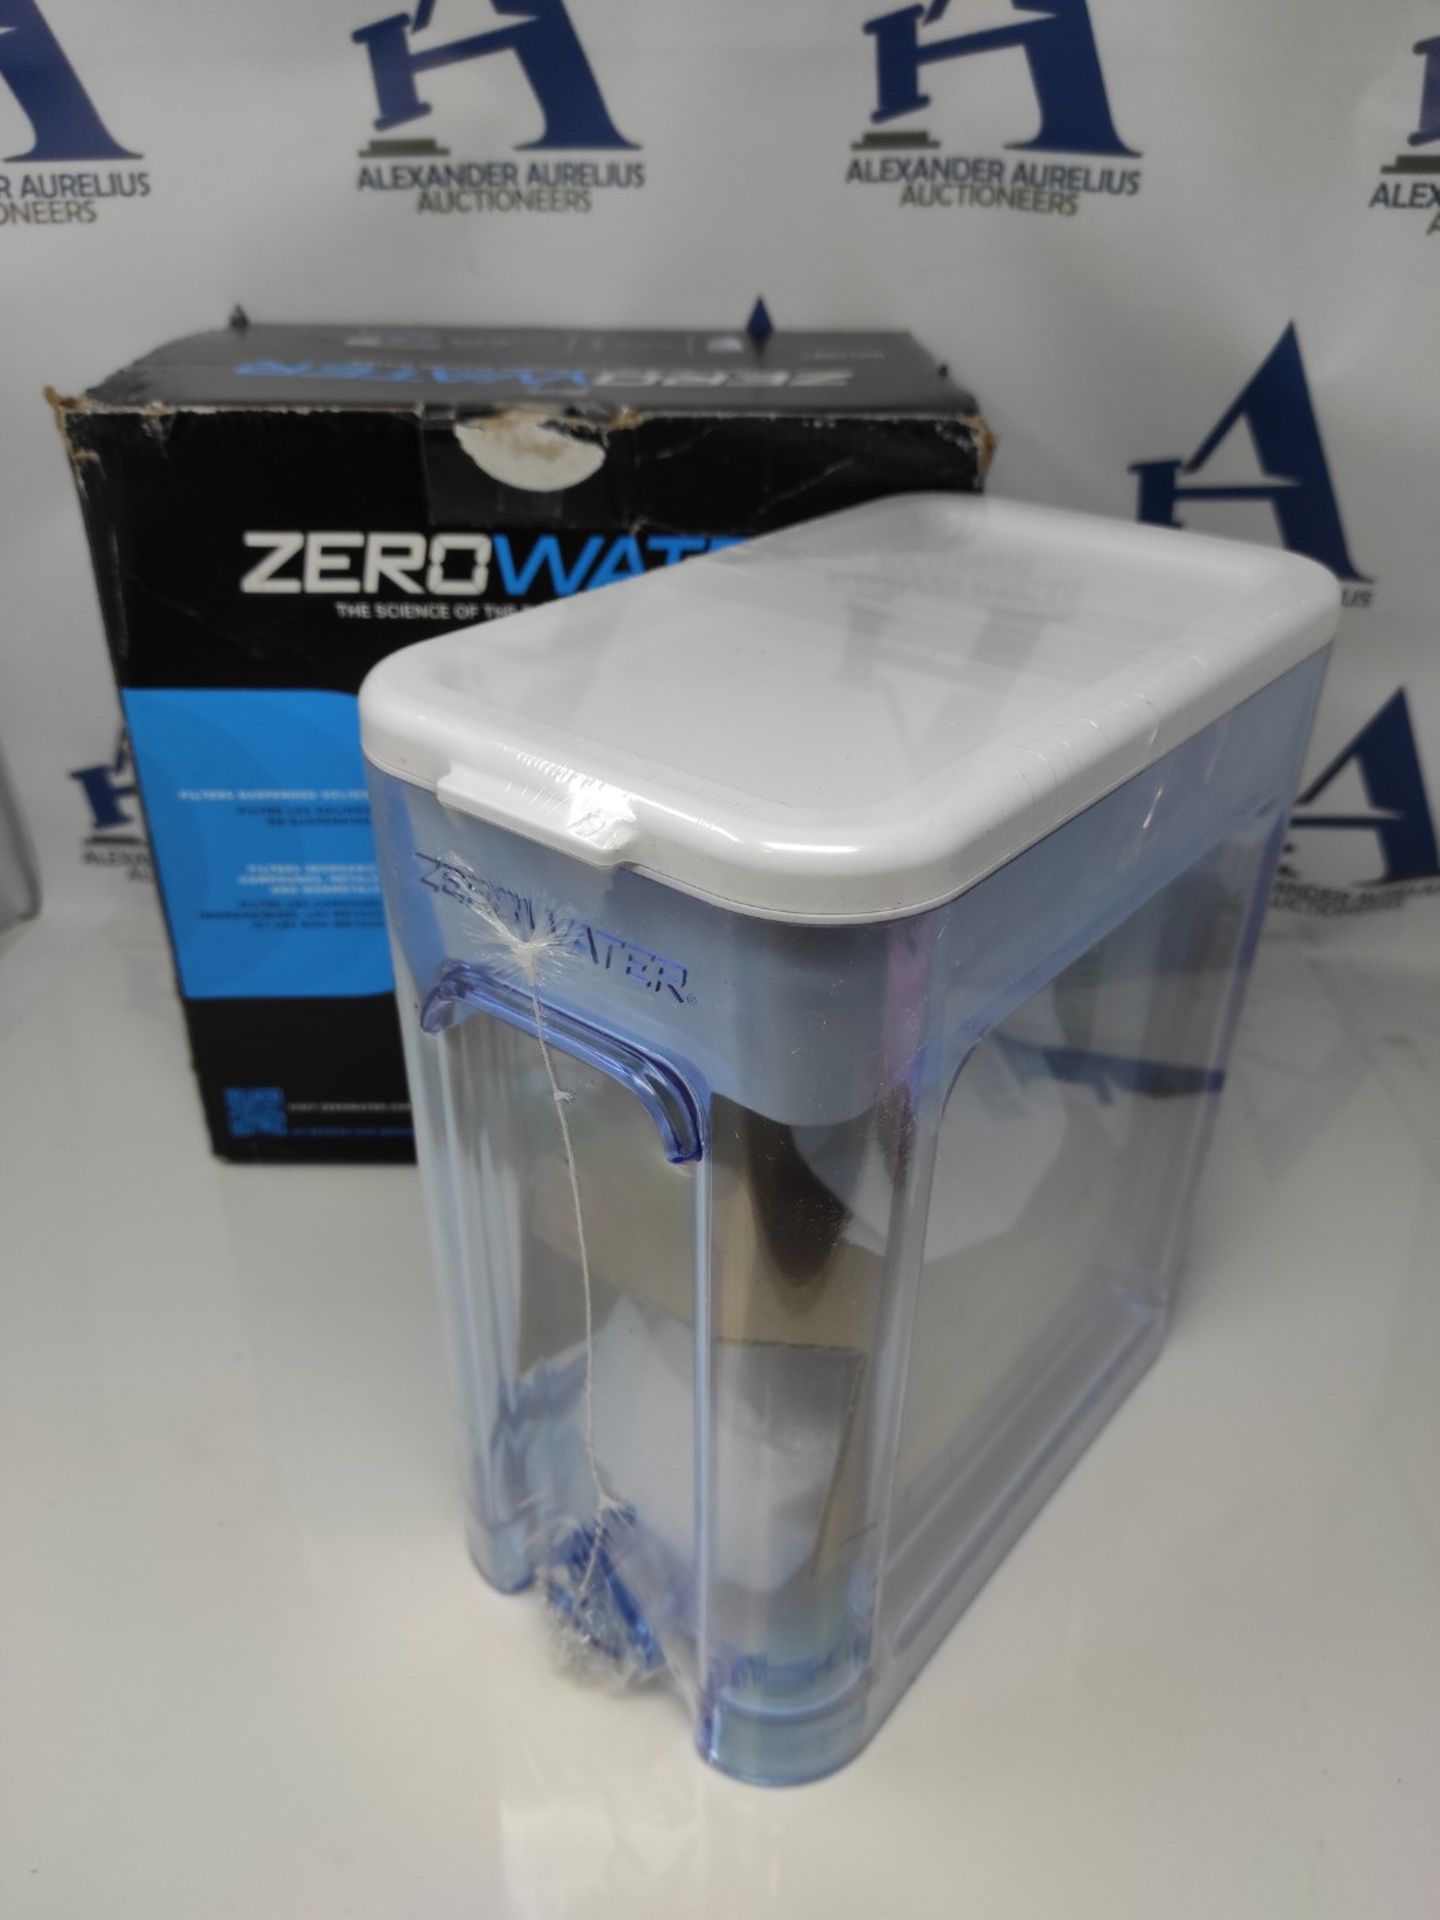 ZeroWater 5.2 L Cup Ready-Read 5-Stage Water Filter Dispenser, IAPMO Certified to Redu - Image 2 of 2